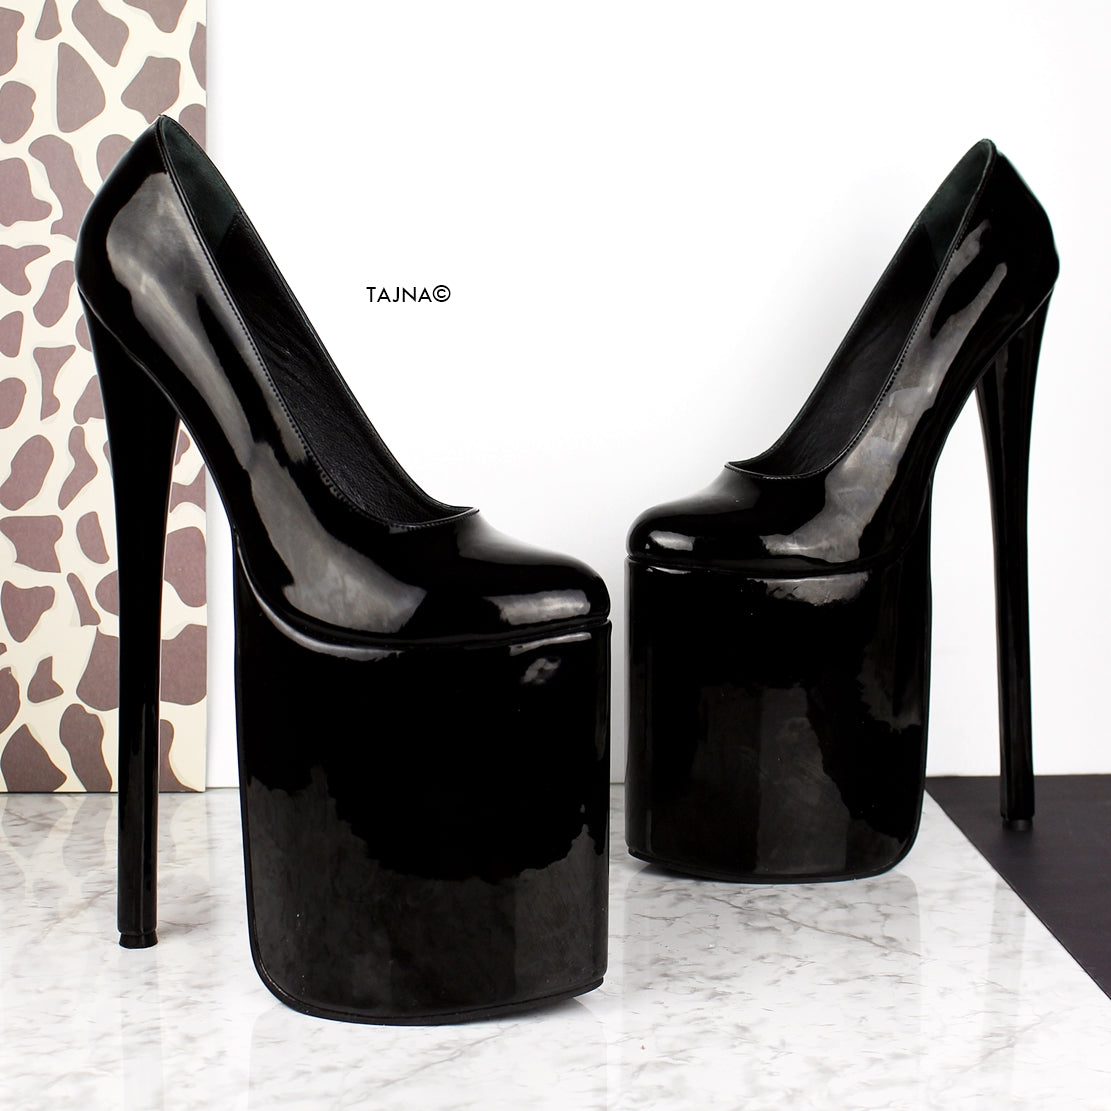 25 Types of Heels: The Ultimate Guide – Clickless® High Heel Protectors